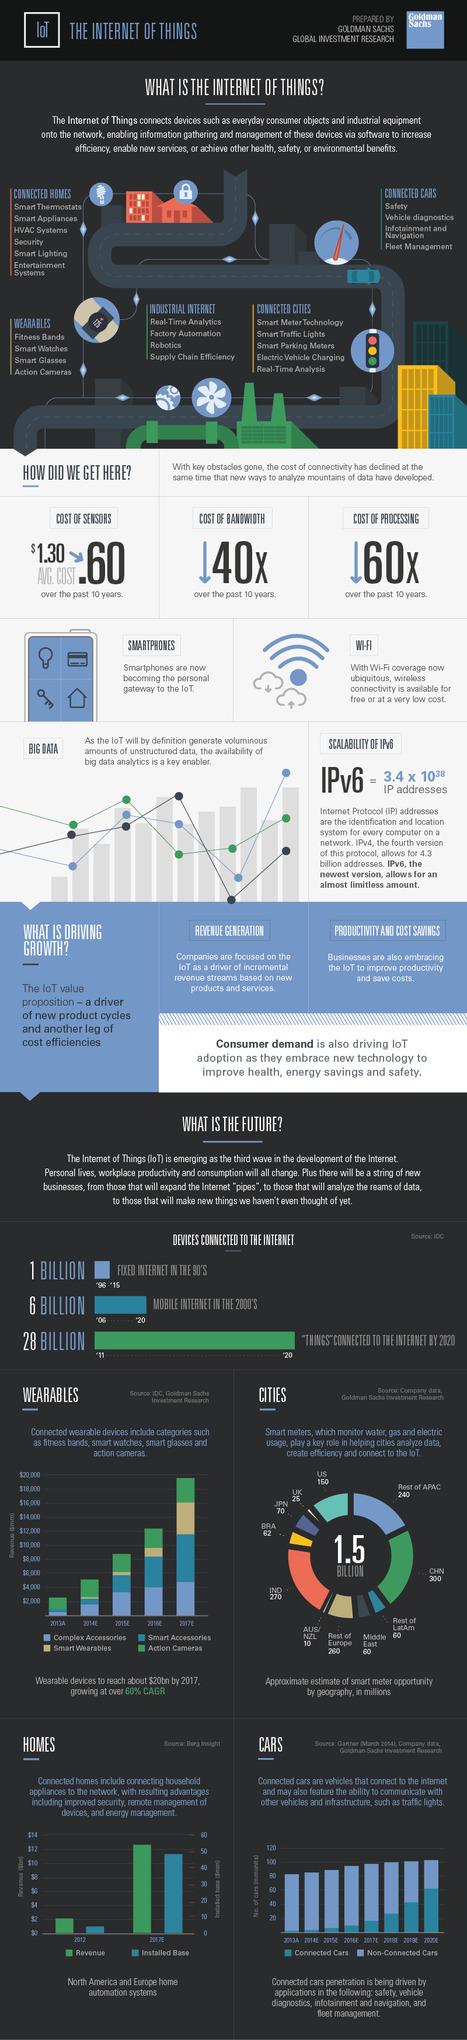 Goldman Sachs | What is the Internet of Things? [Infographic] | 21st Century Learning and Teaching | Scoop.it